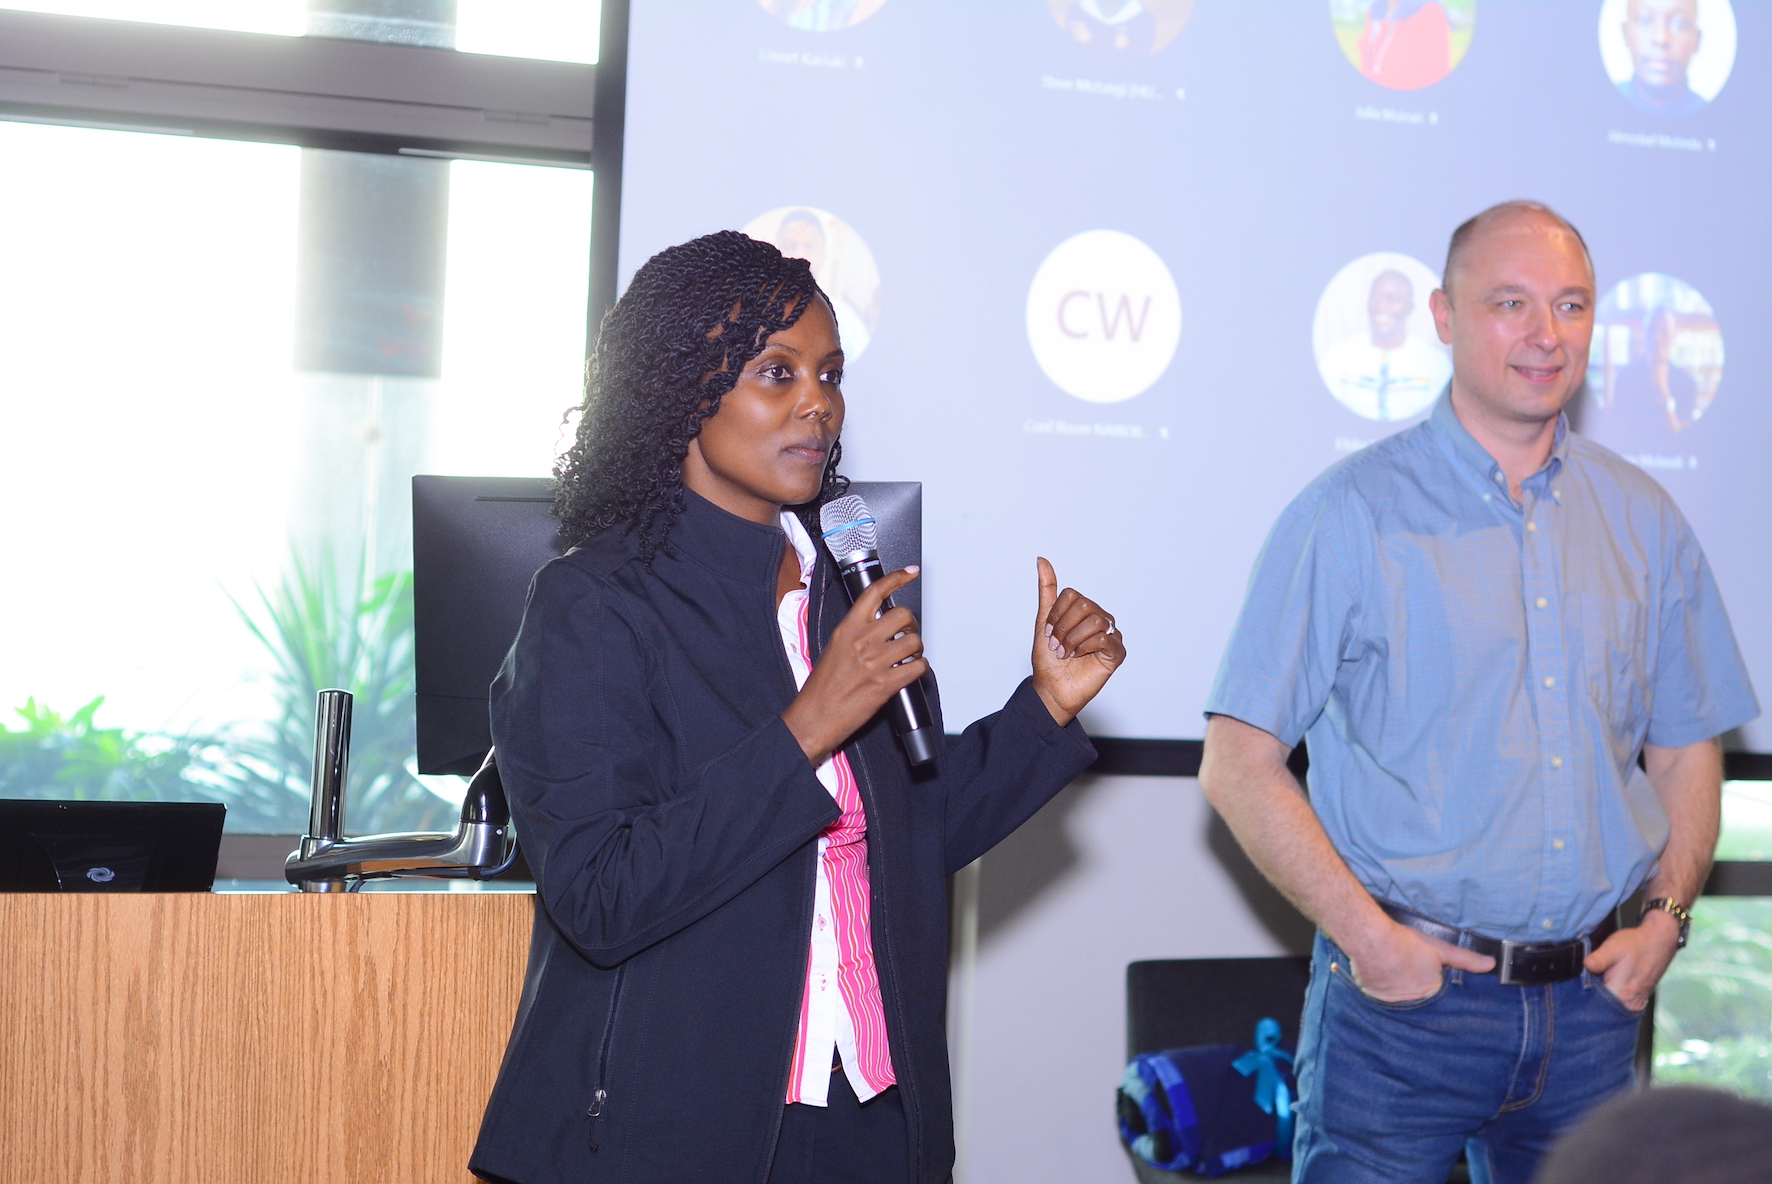 (L-R) Catherine Muraga, Managing Director, Microsoft Africa Development Centre, and Igor Sakhnov, Corporate Vice President, Engineering at Microsoft, addressing staff at the Nairobi office of the ADC.